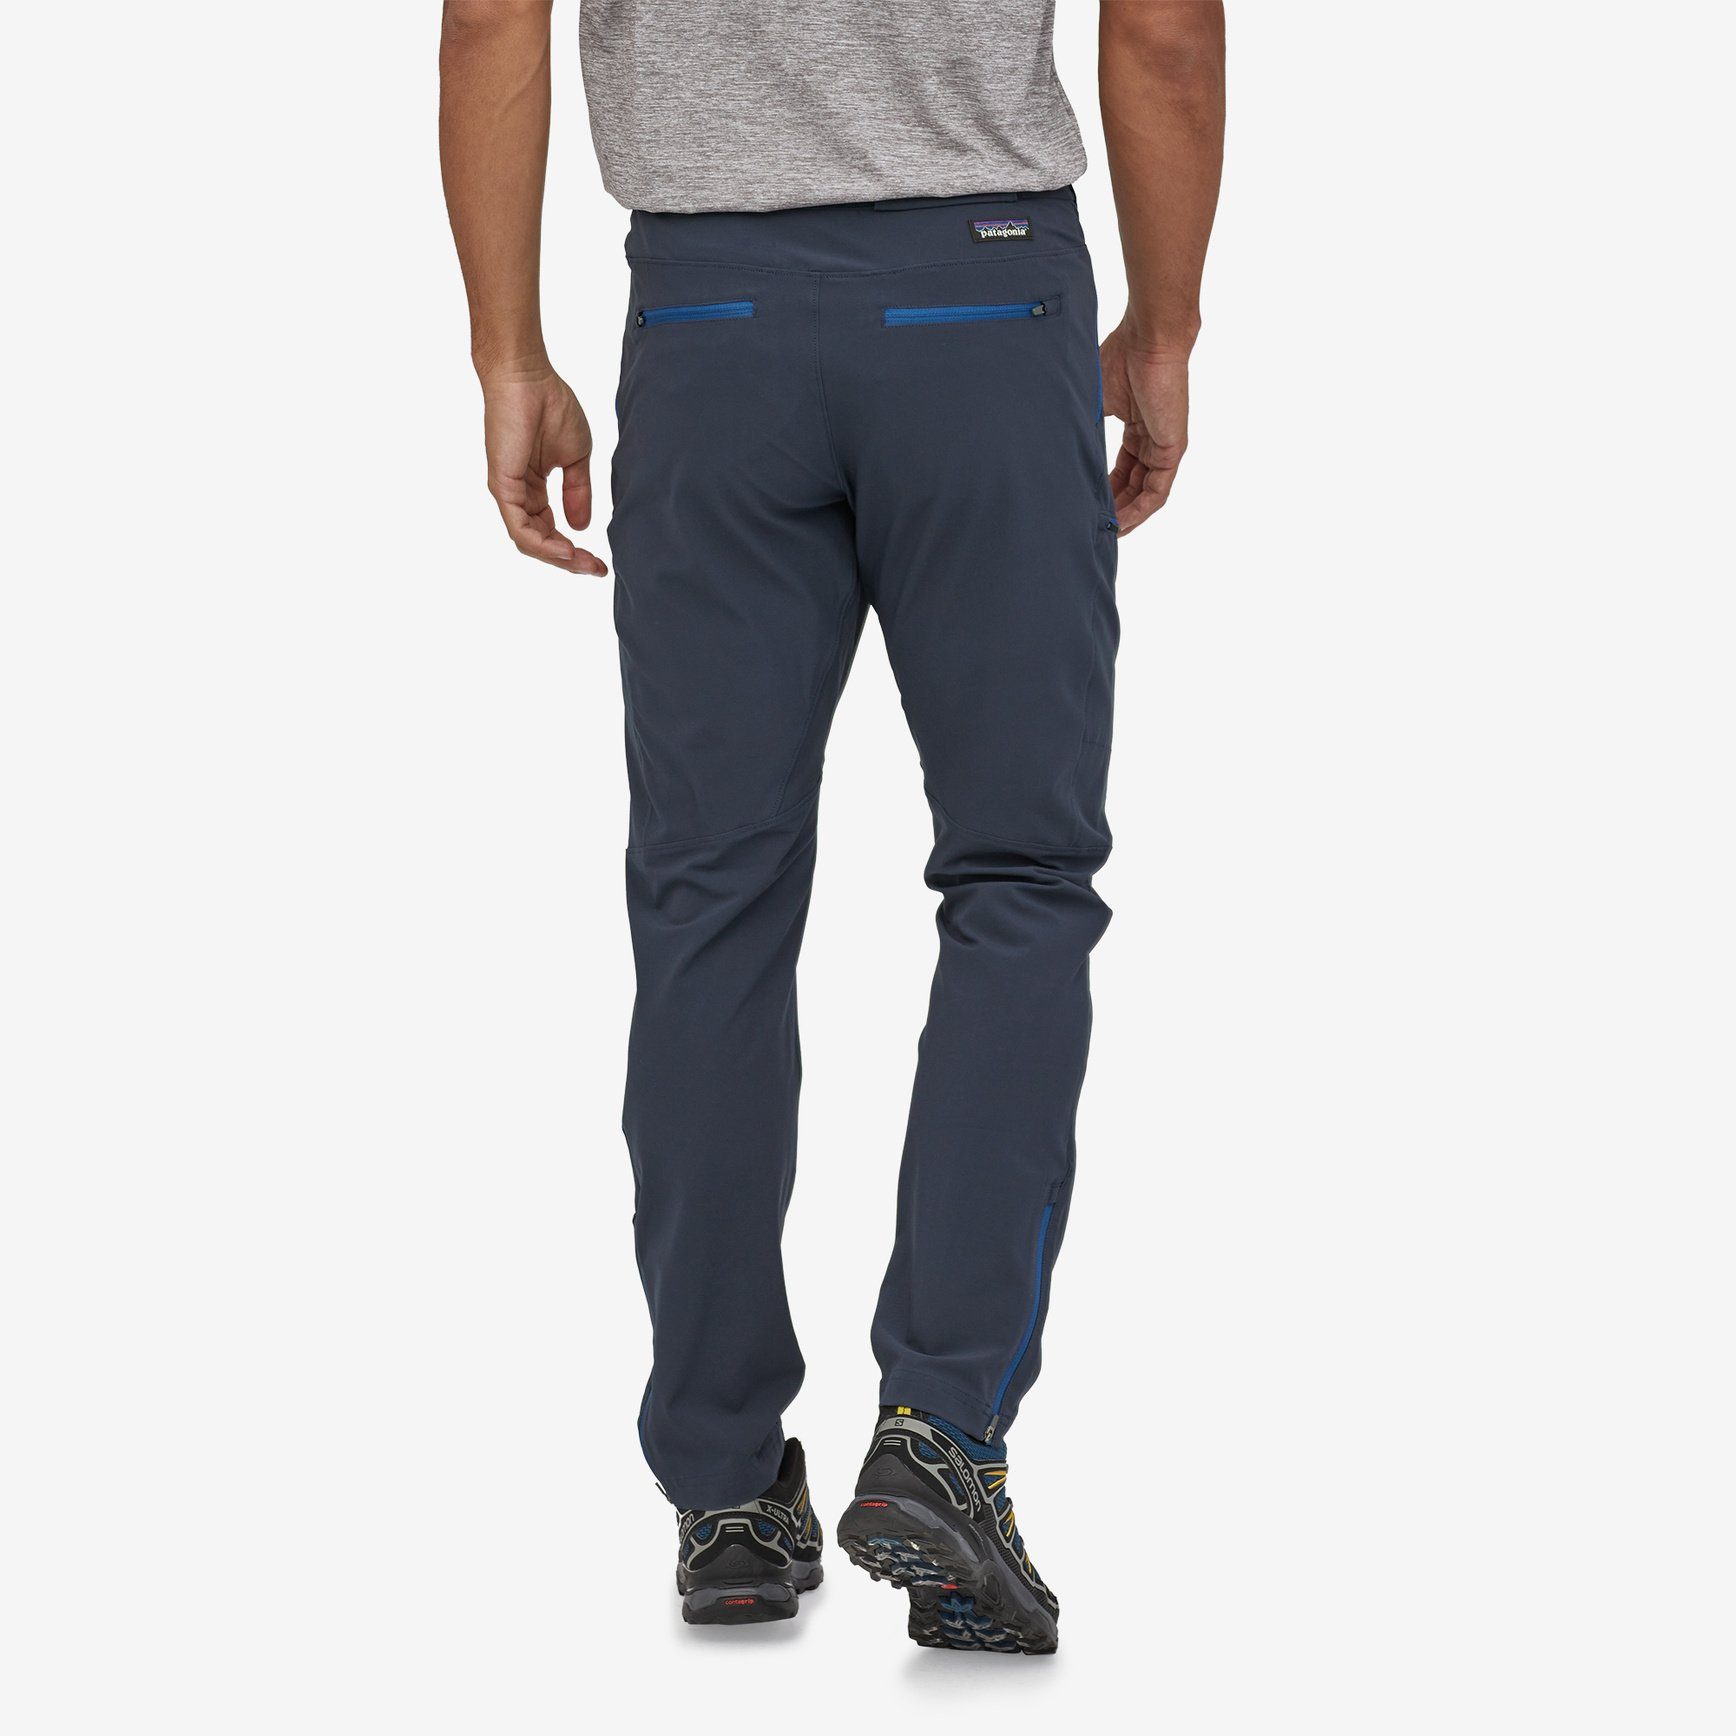 Altiva Trail M Pant Patagonia Outdoorhose